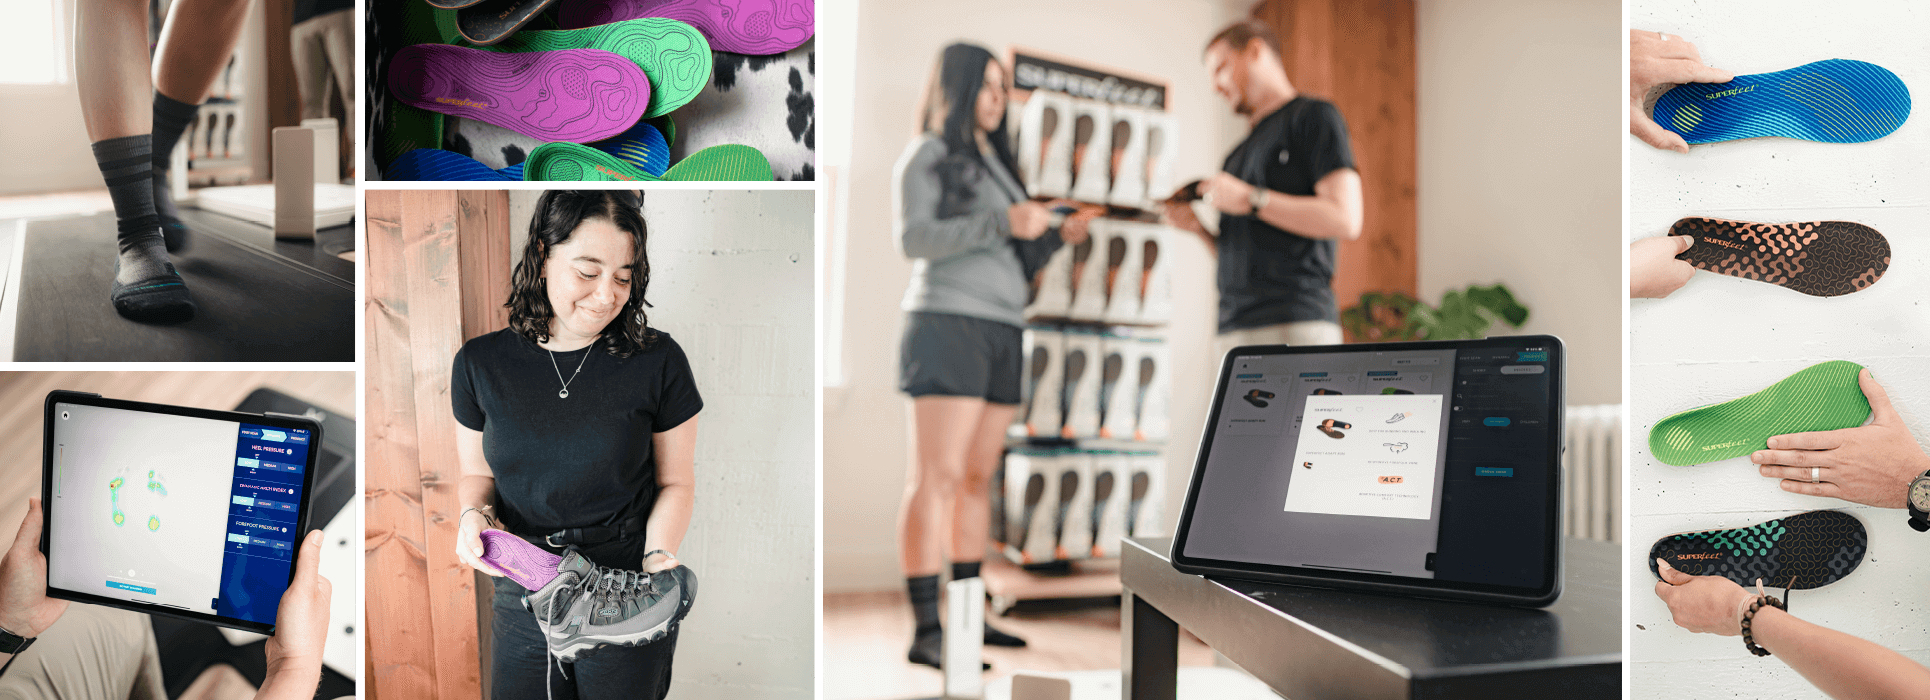 Collage - socked feet walking across pressure plate. Smart tablet held in hand, reviewing gait analysis on screen. Splayed pair of Superfeet Trailblazer insoles. Shopper inserting insole into footwear. Two people with an insole. Hands holding insoles